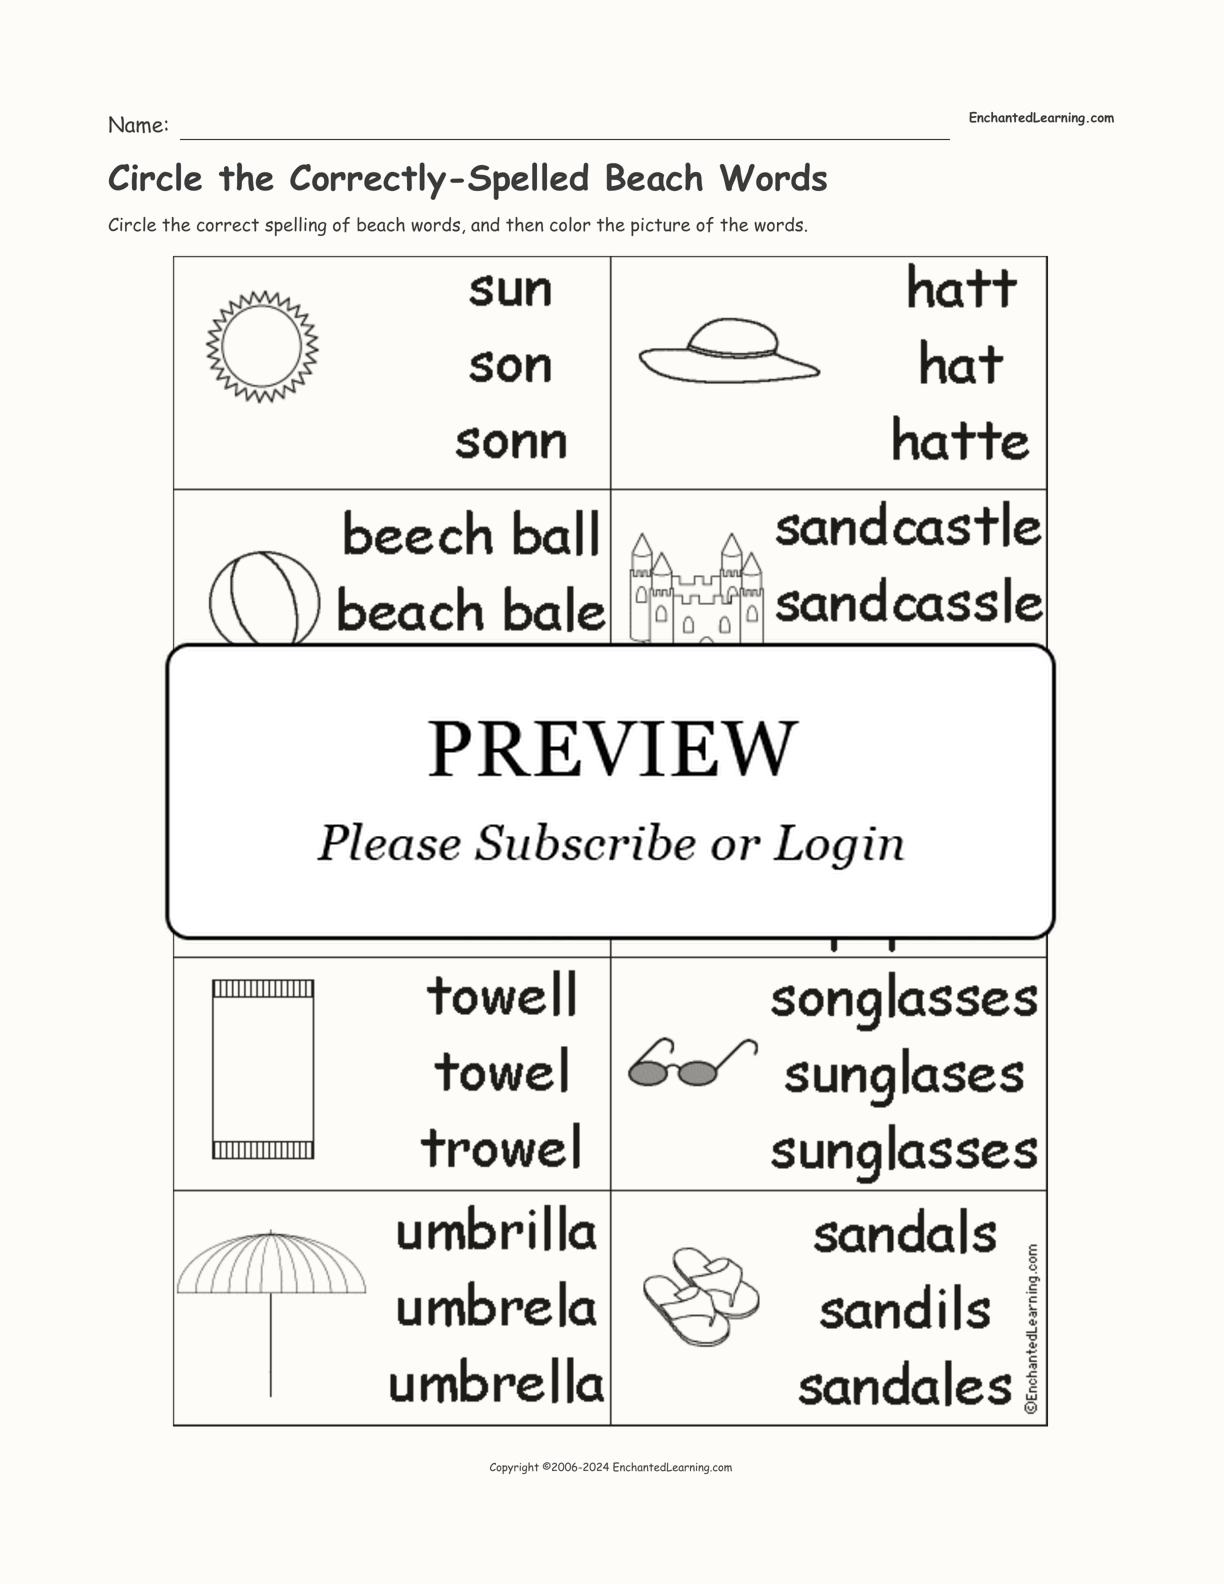 Circle the Correctly-Spelled Beach Words interactive worksheet page 1